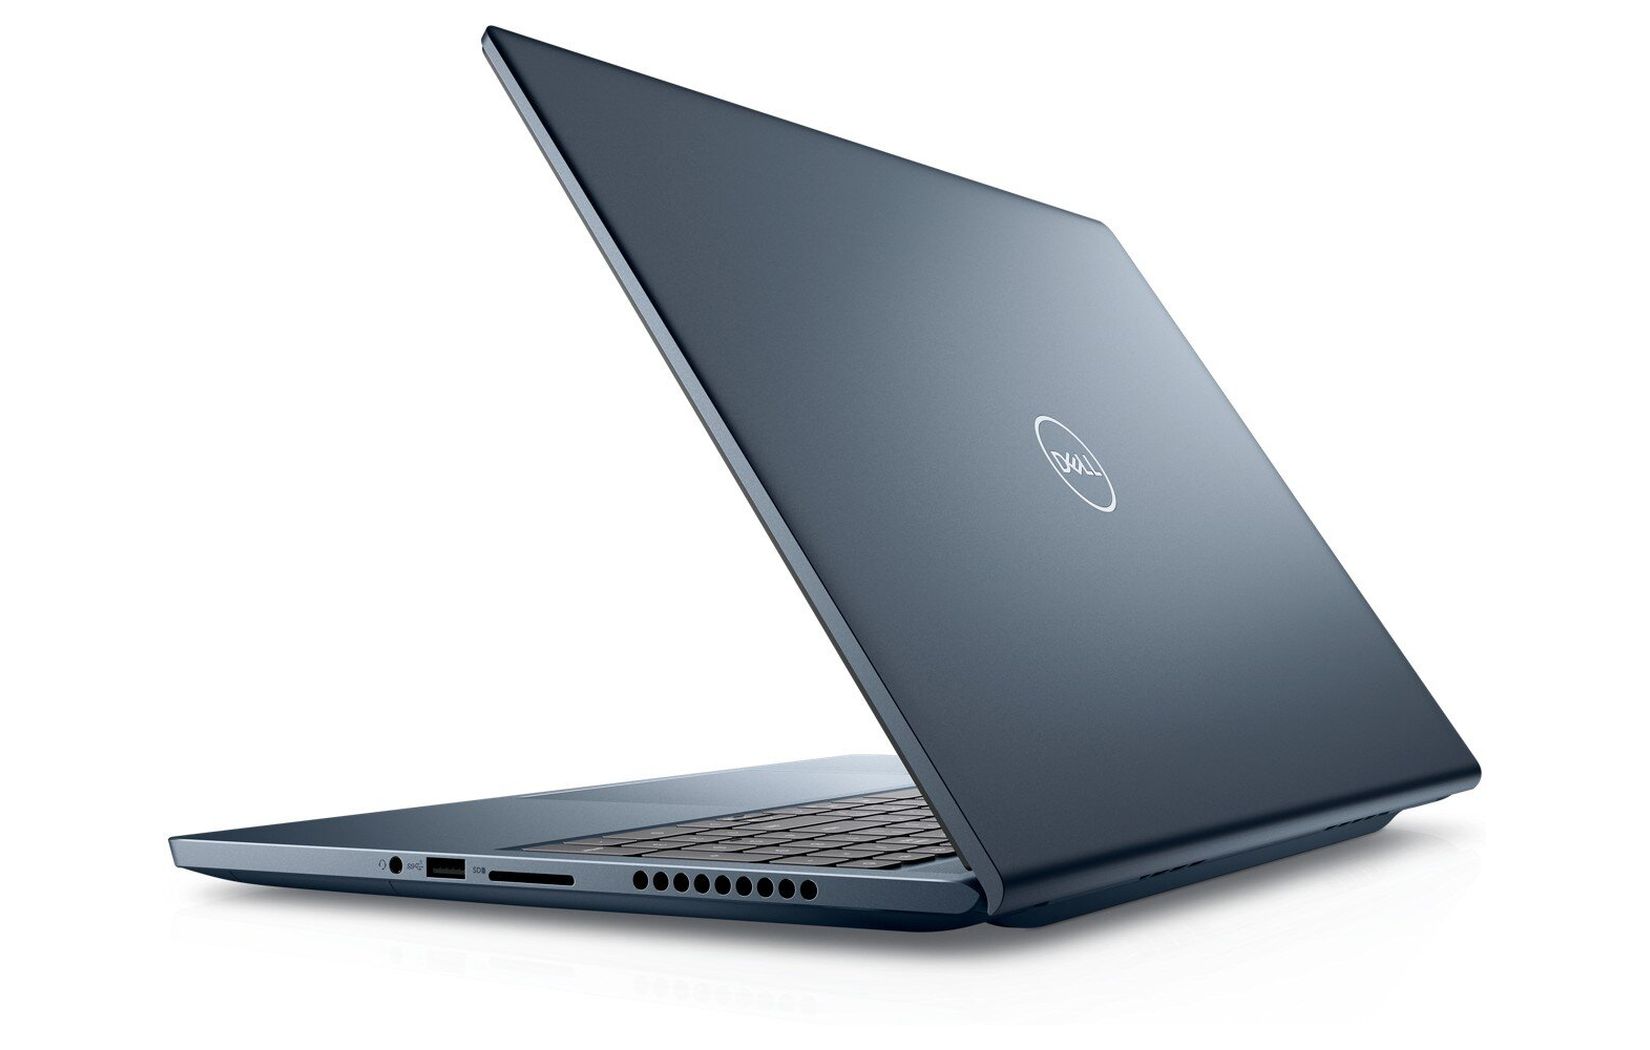 Dell Laptop Starting Price Clearance, 42% OFF | www.enaco.com.pe